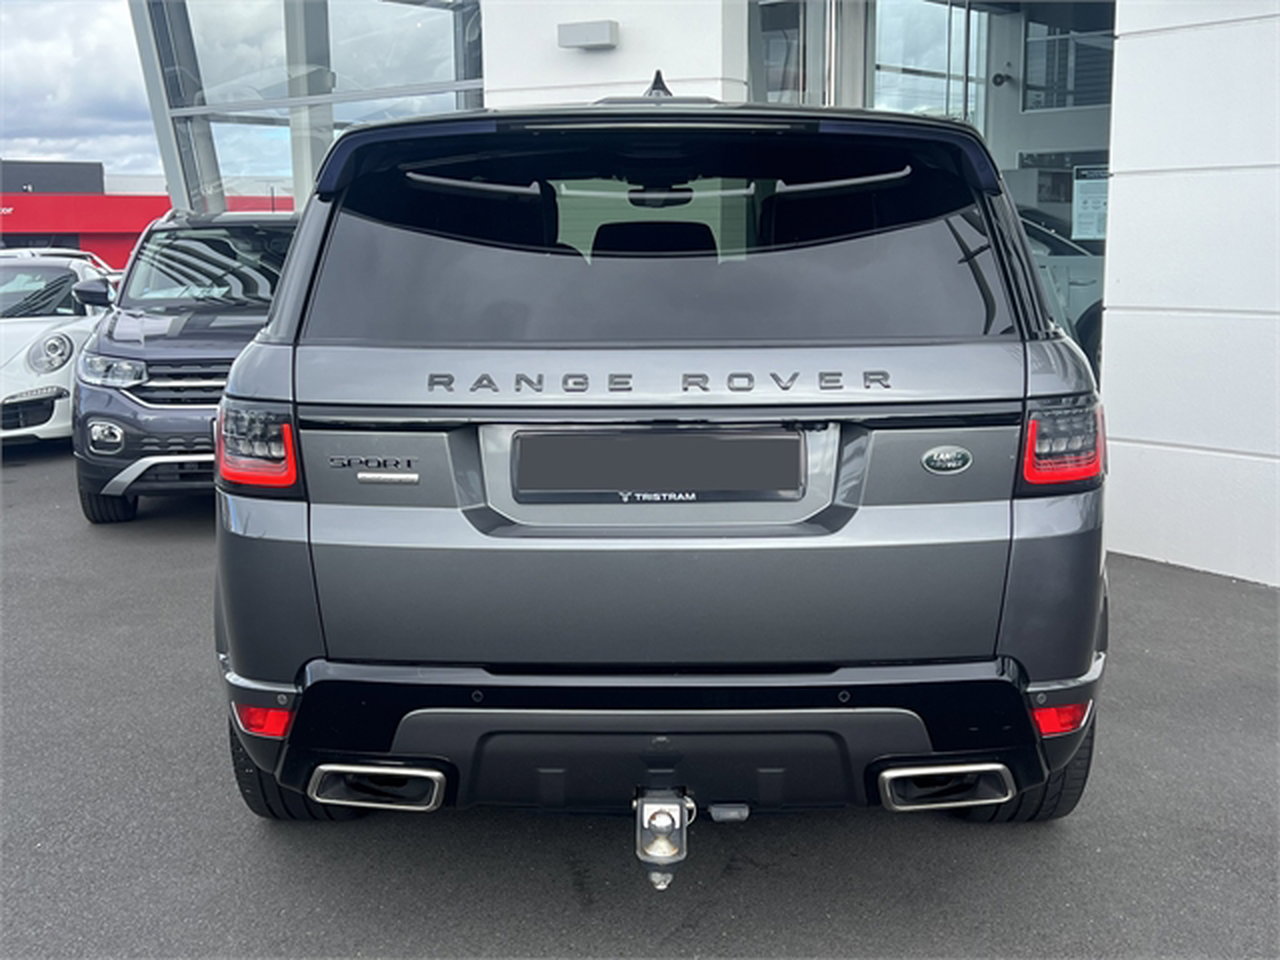 2018 Land Rover Range Rover Sport Black out, Panoramic sunroof, Towbar